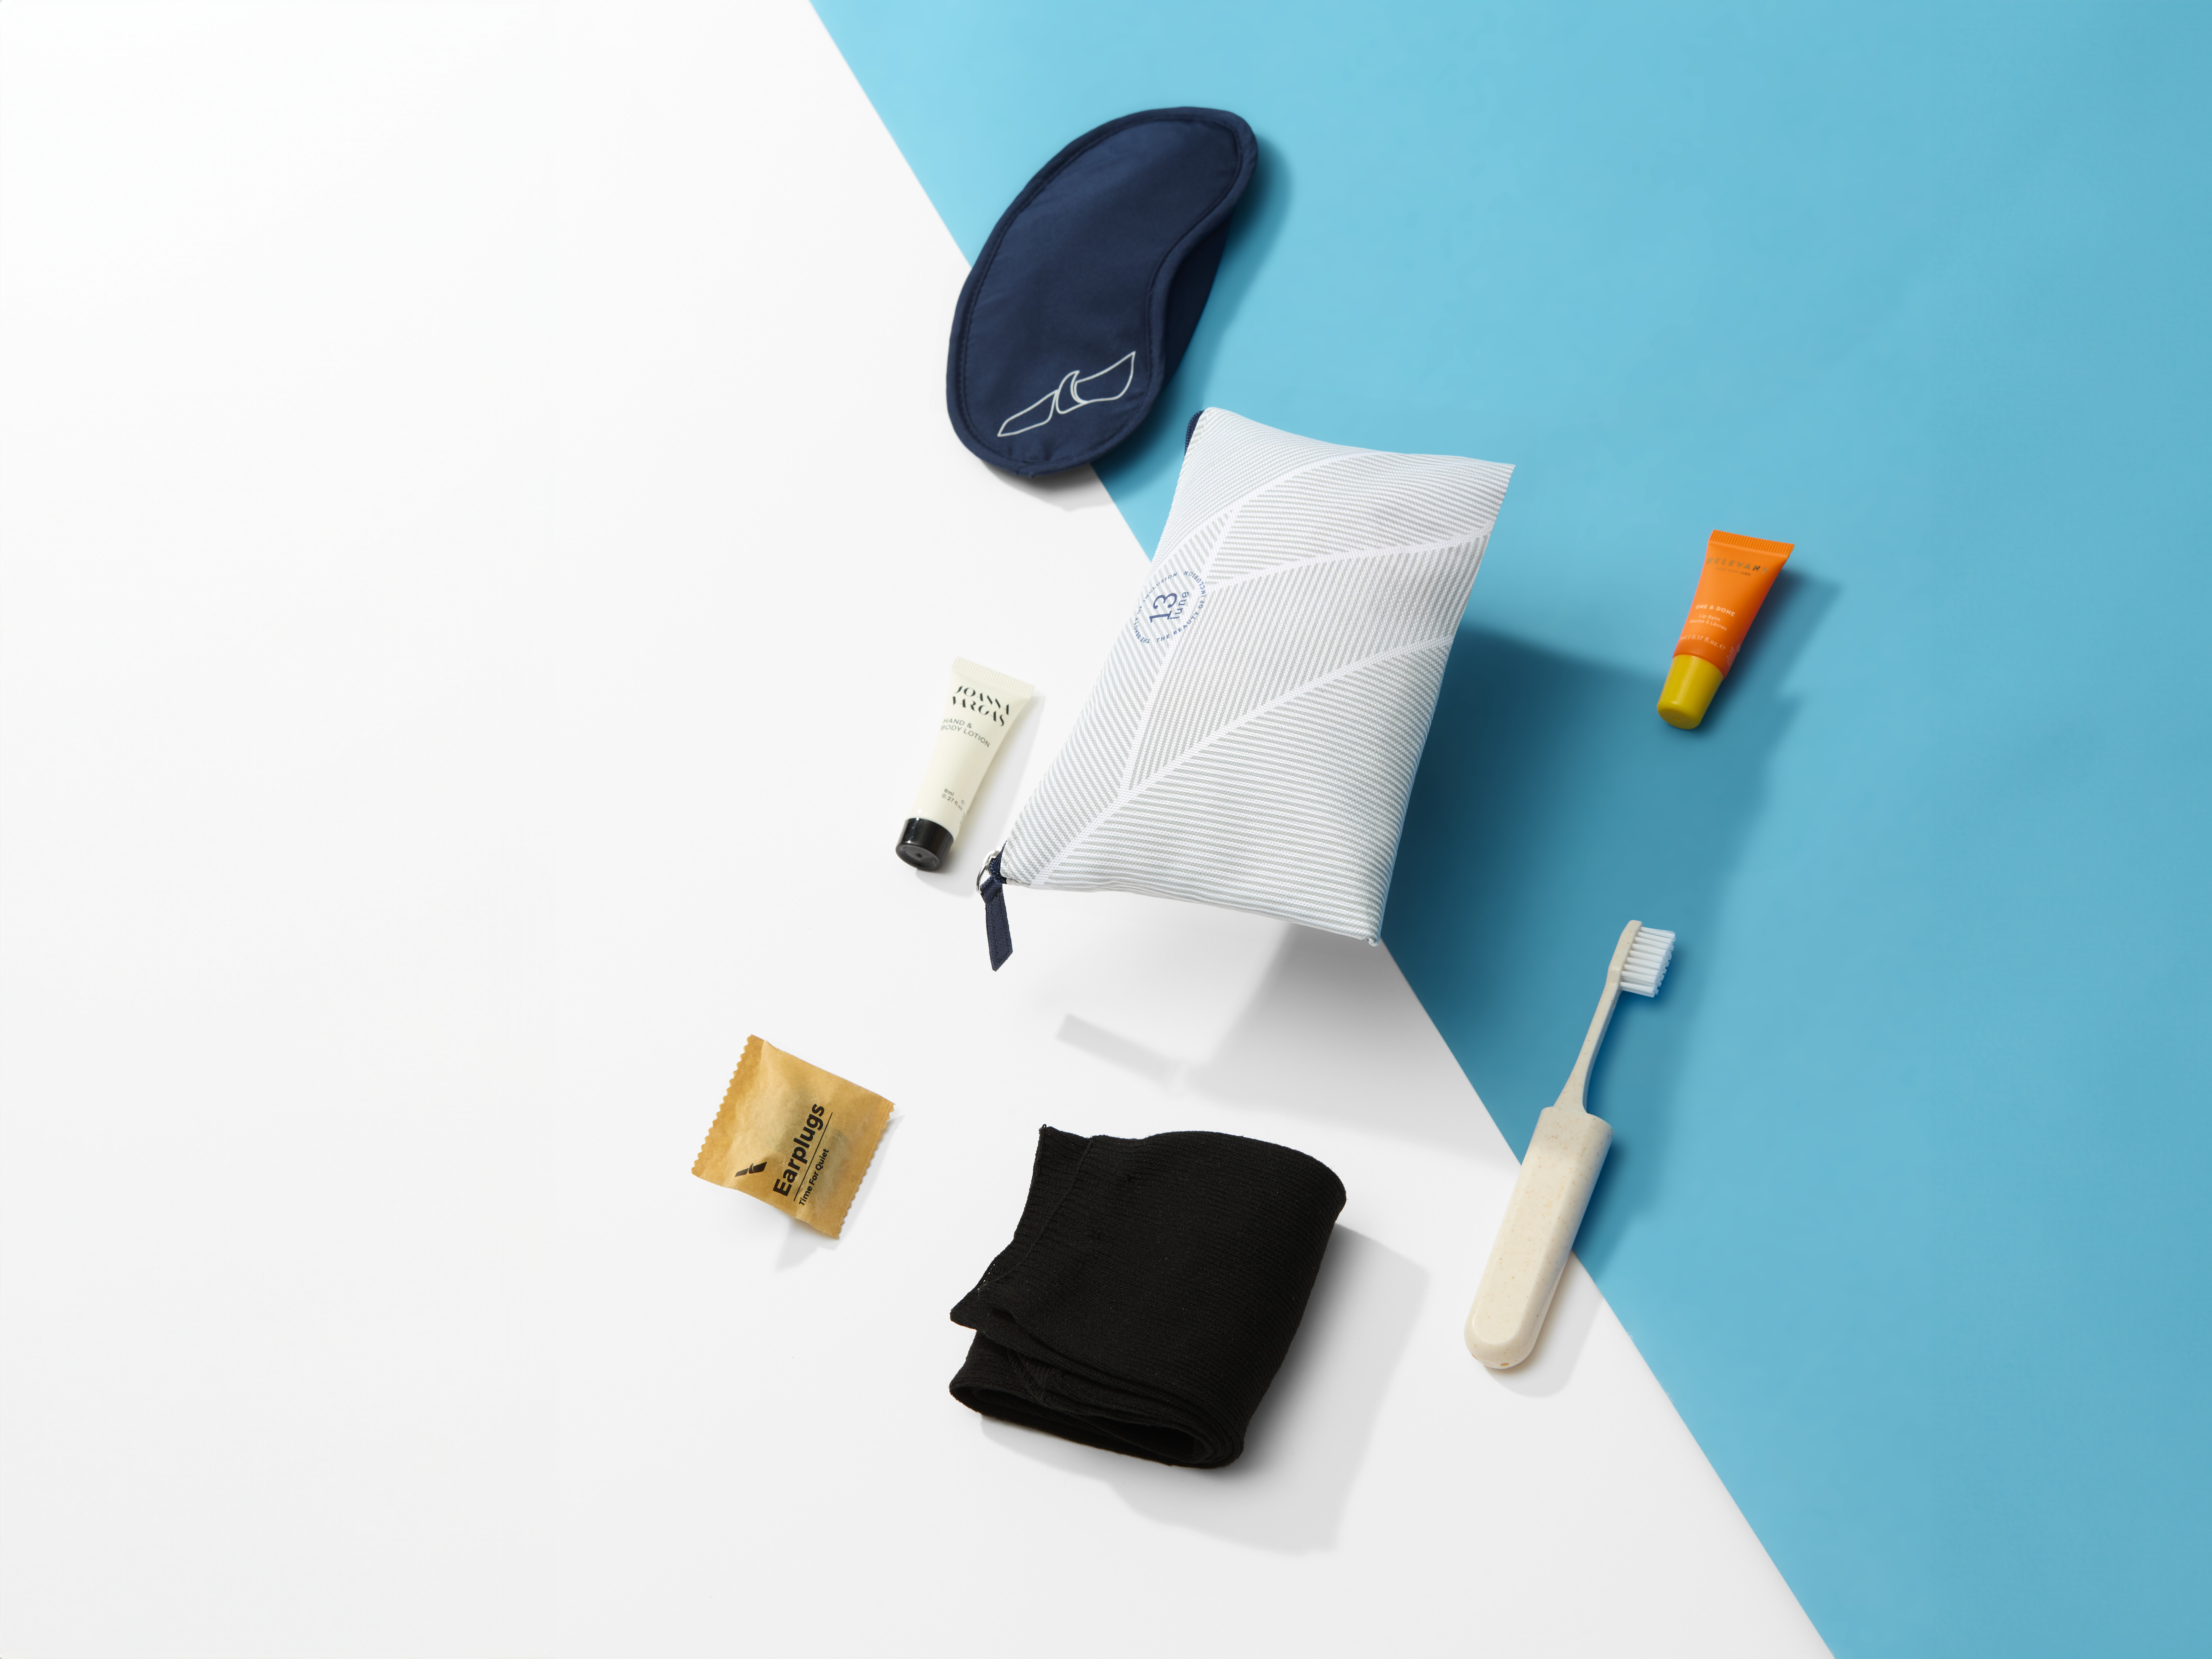 American Airlines Limited Edition Thirteen Lune Premium Economy Amenity Kit - Travel News, Insights & Resources.